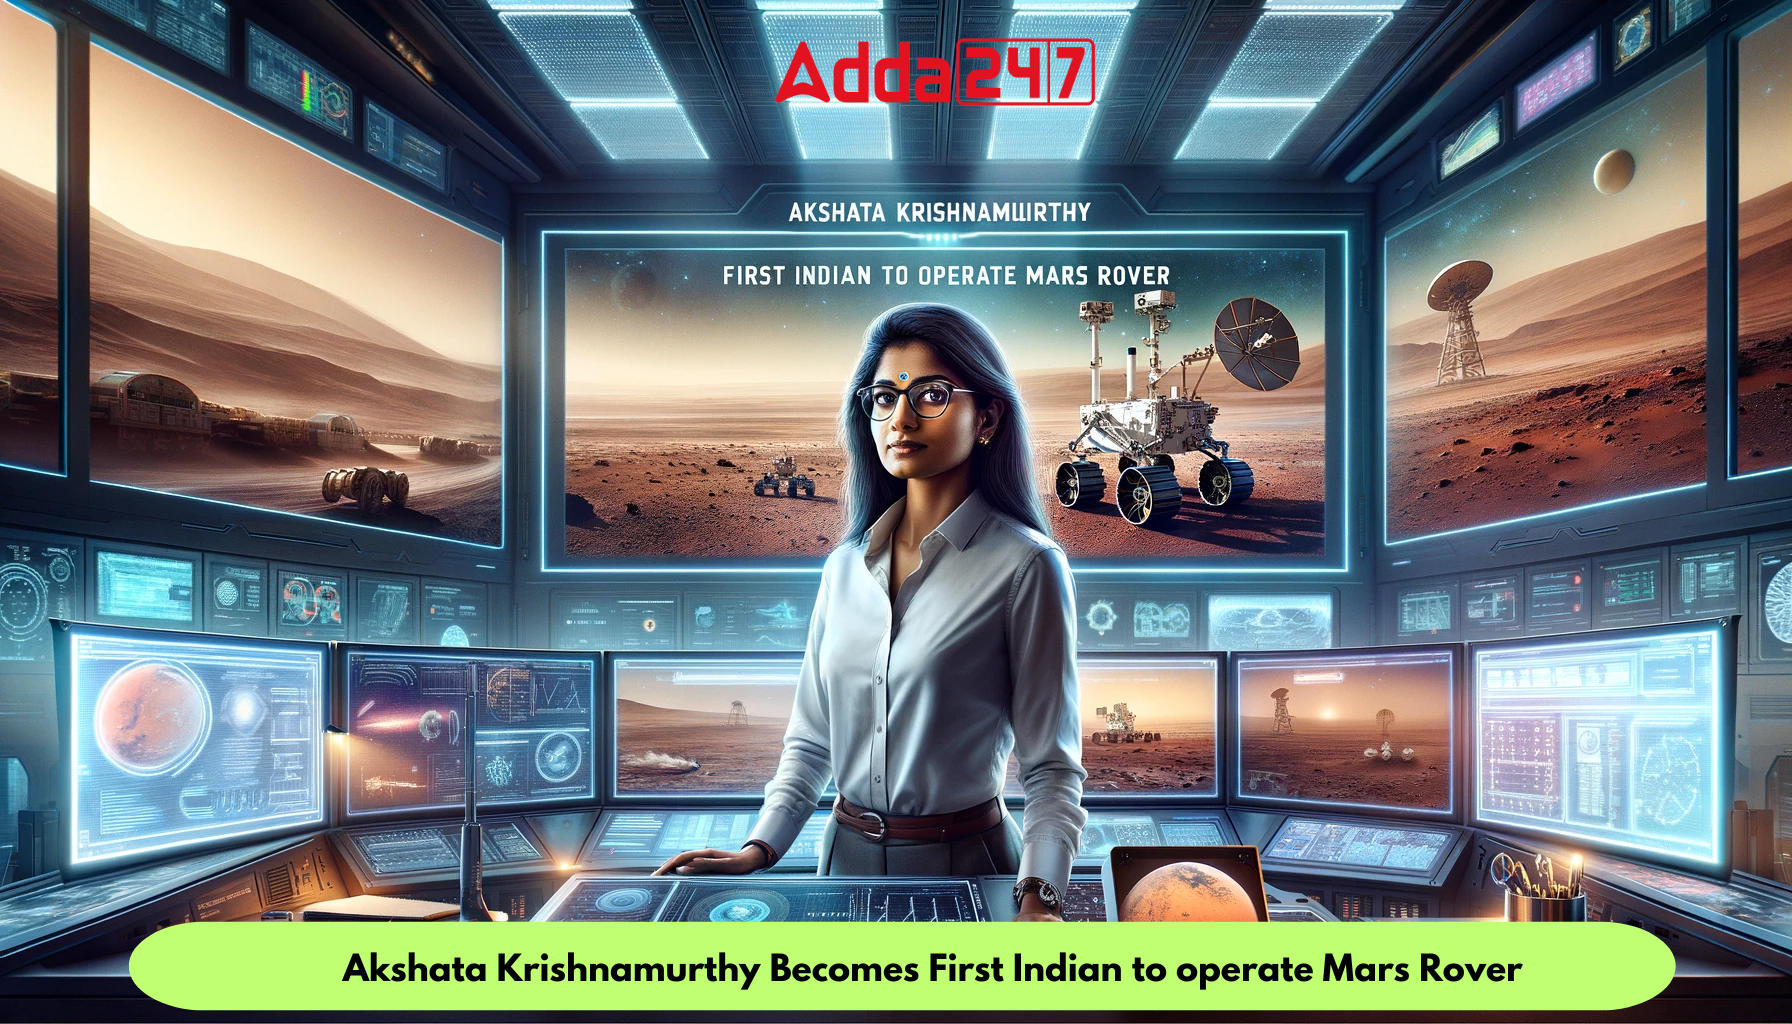 Akshata Krishnamurthy Becomes First Indian to operate Mars Rover